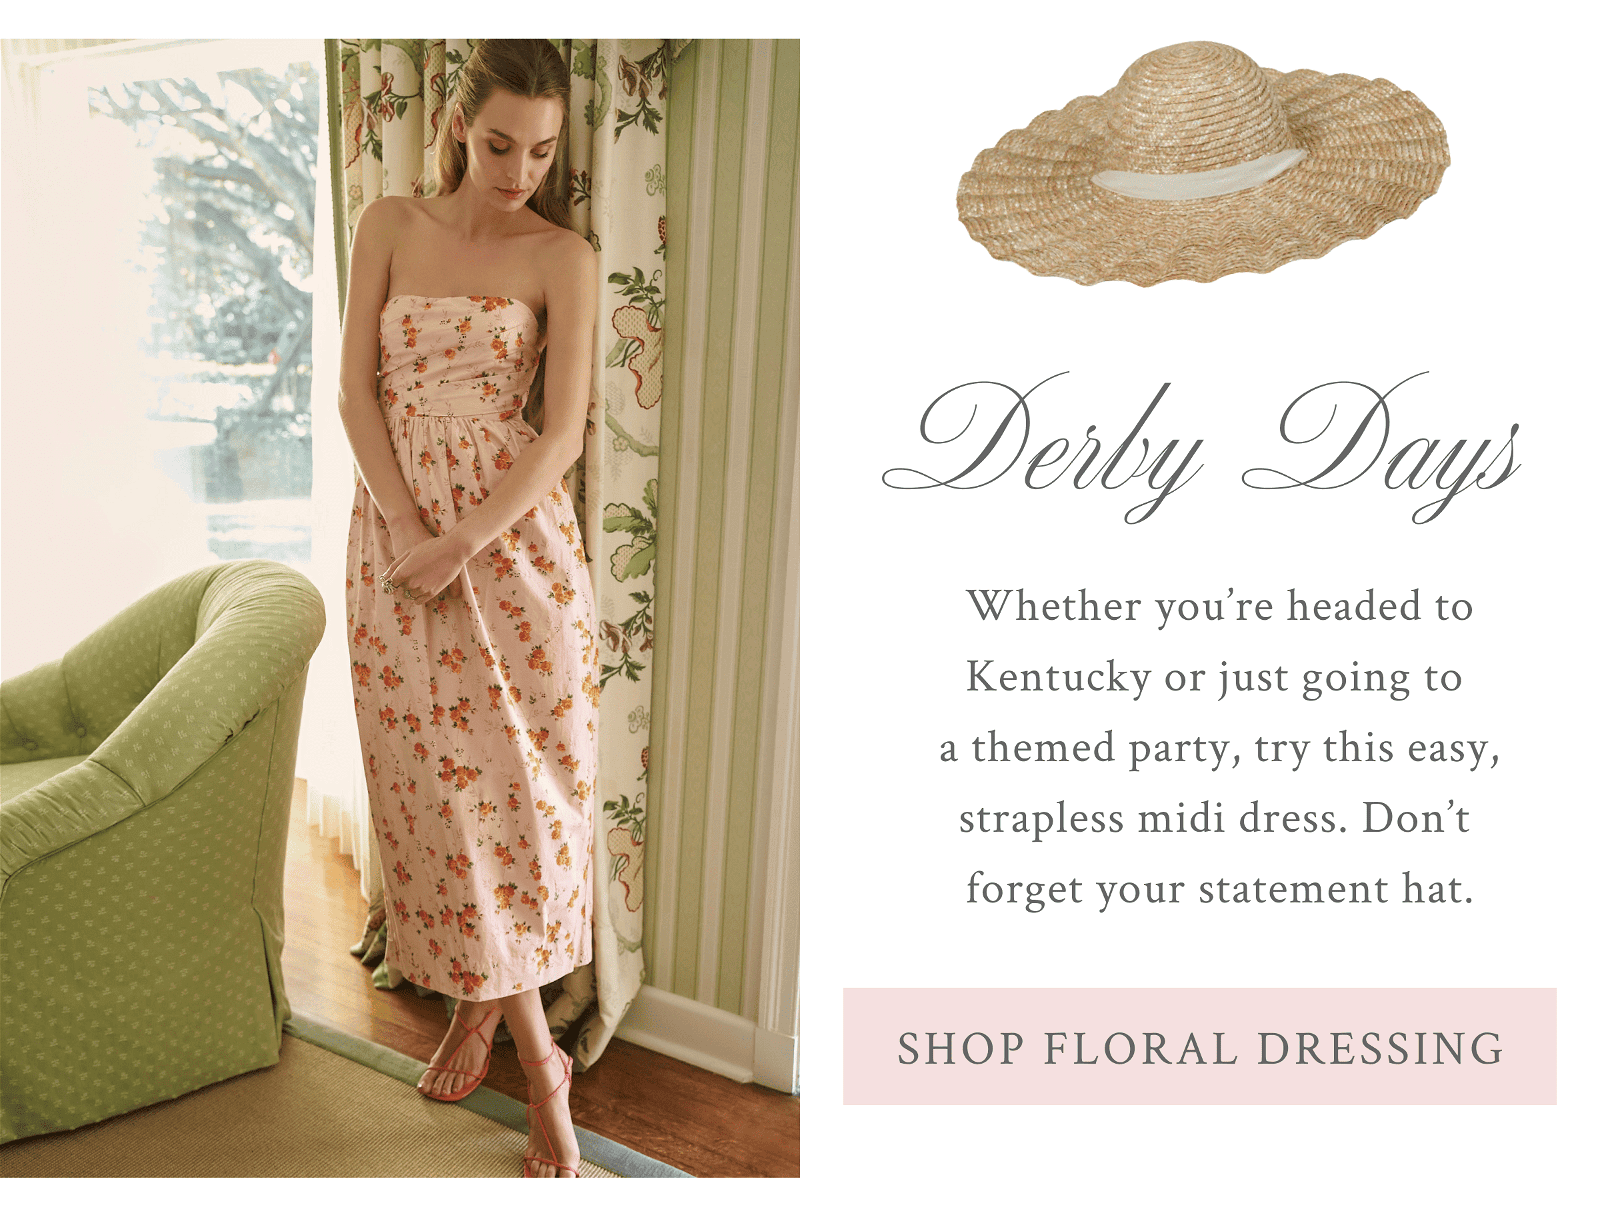 Whether you’re headed to Kentucky or just going to a themed party, try this easy, strapless midi dress. Don’t forget your statement hat.